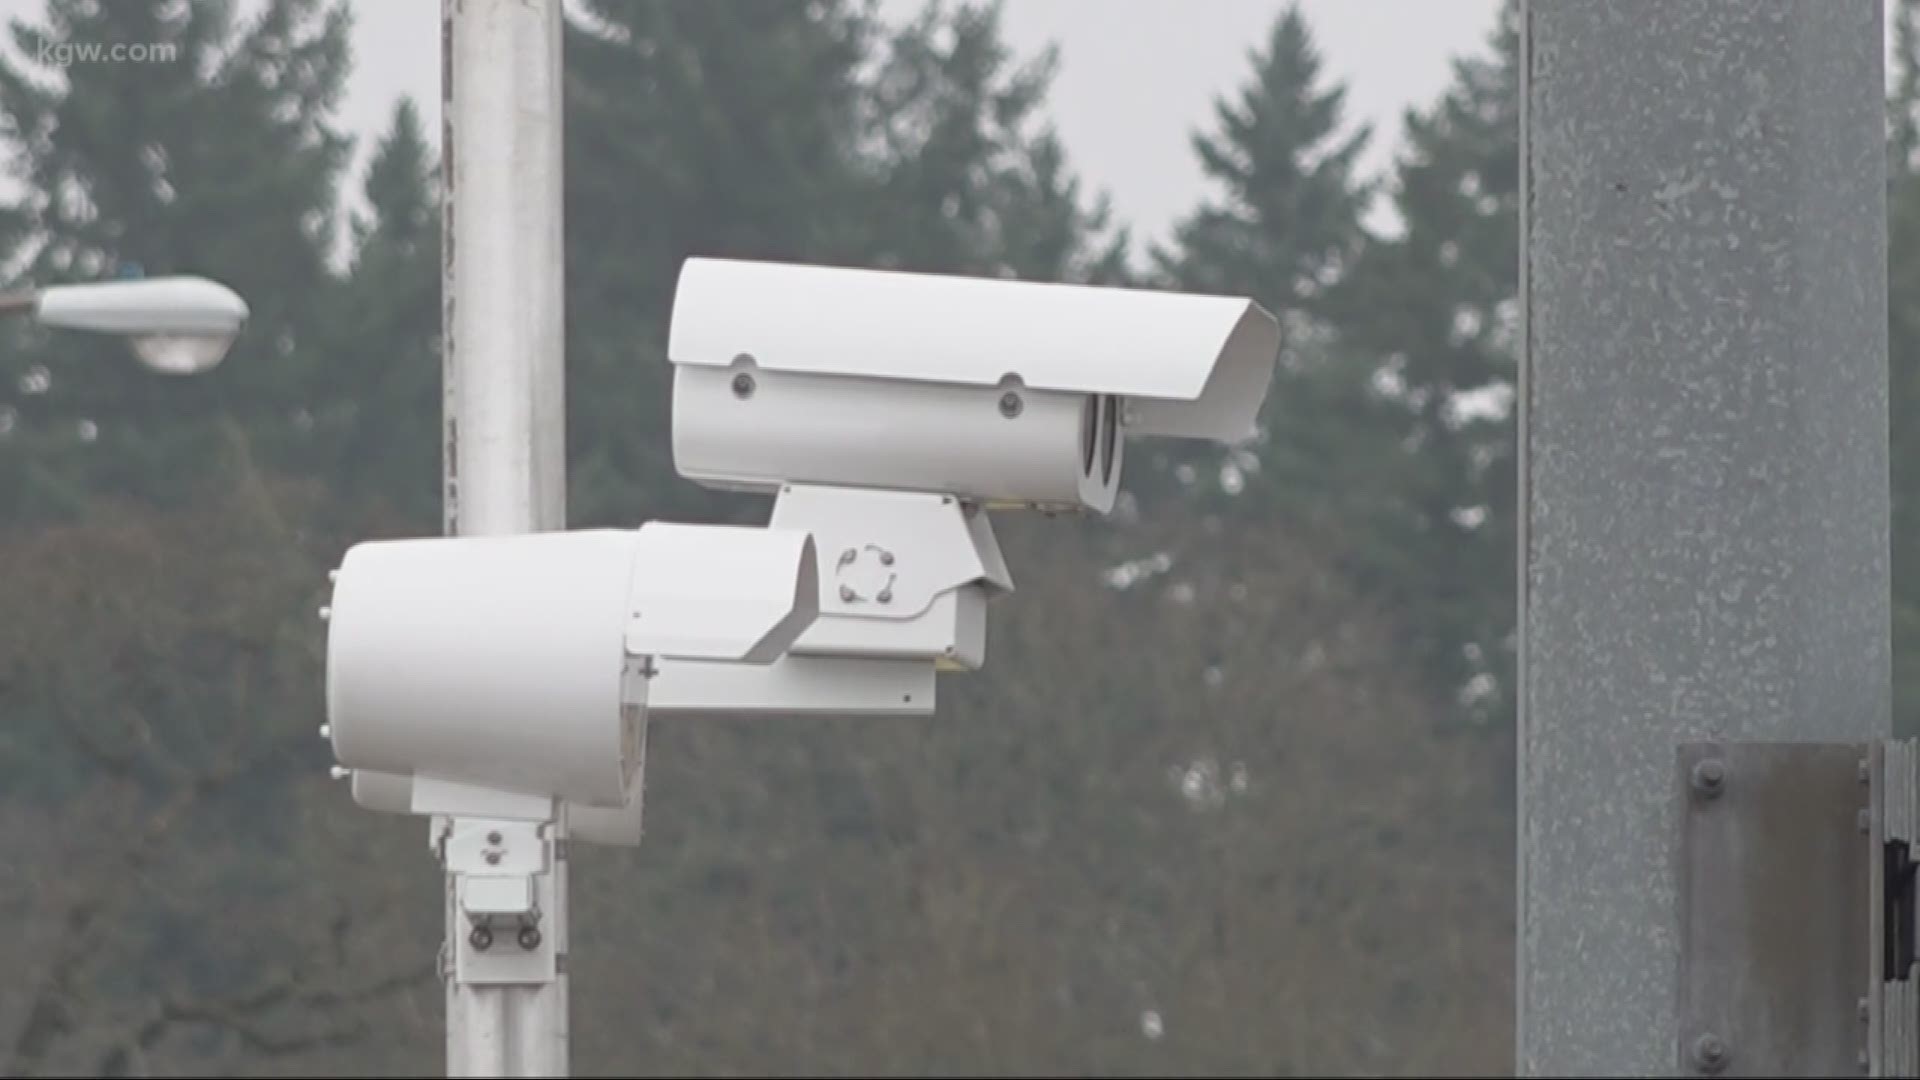 Citations Begin For Red Light Cameras In Tigard Kgw Com